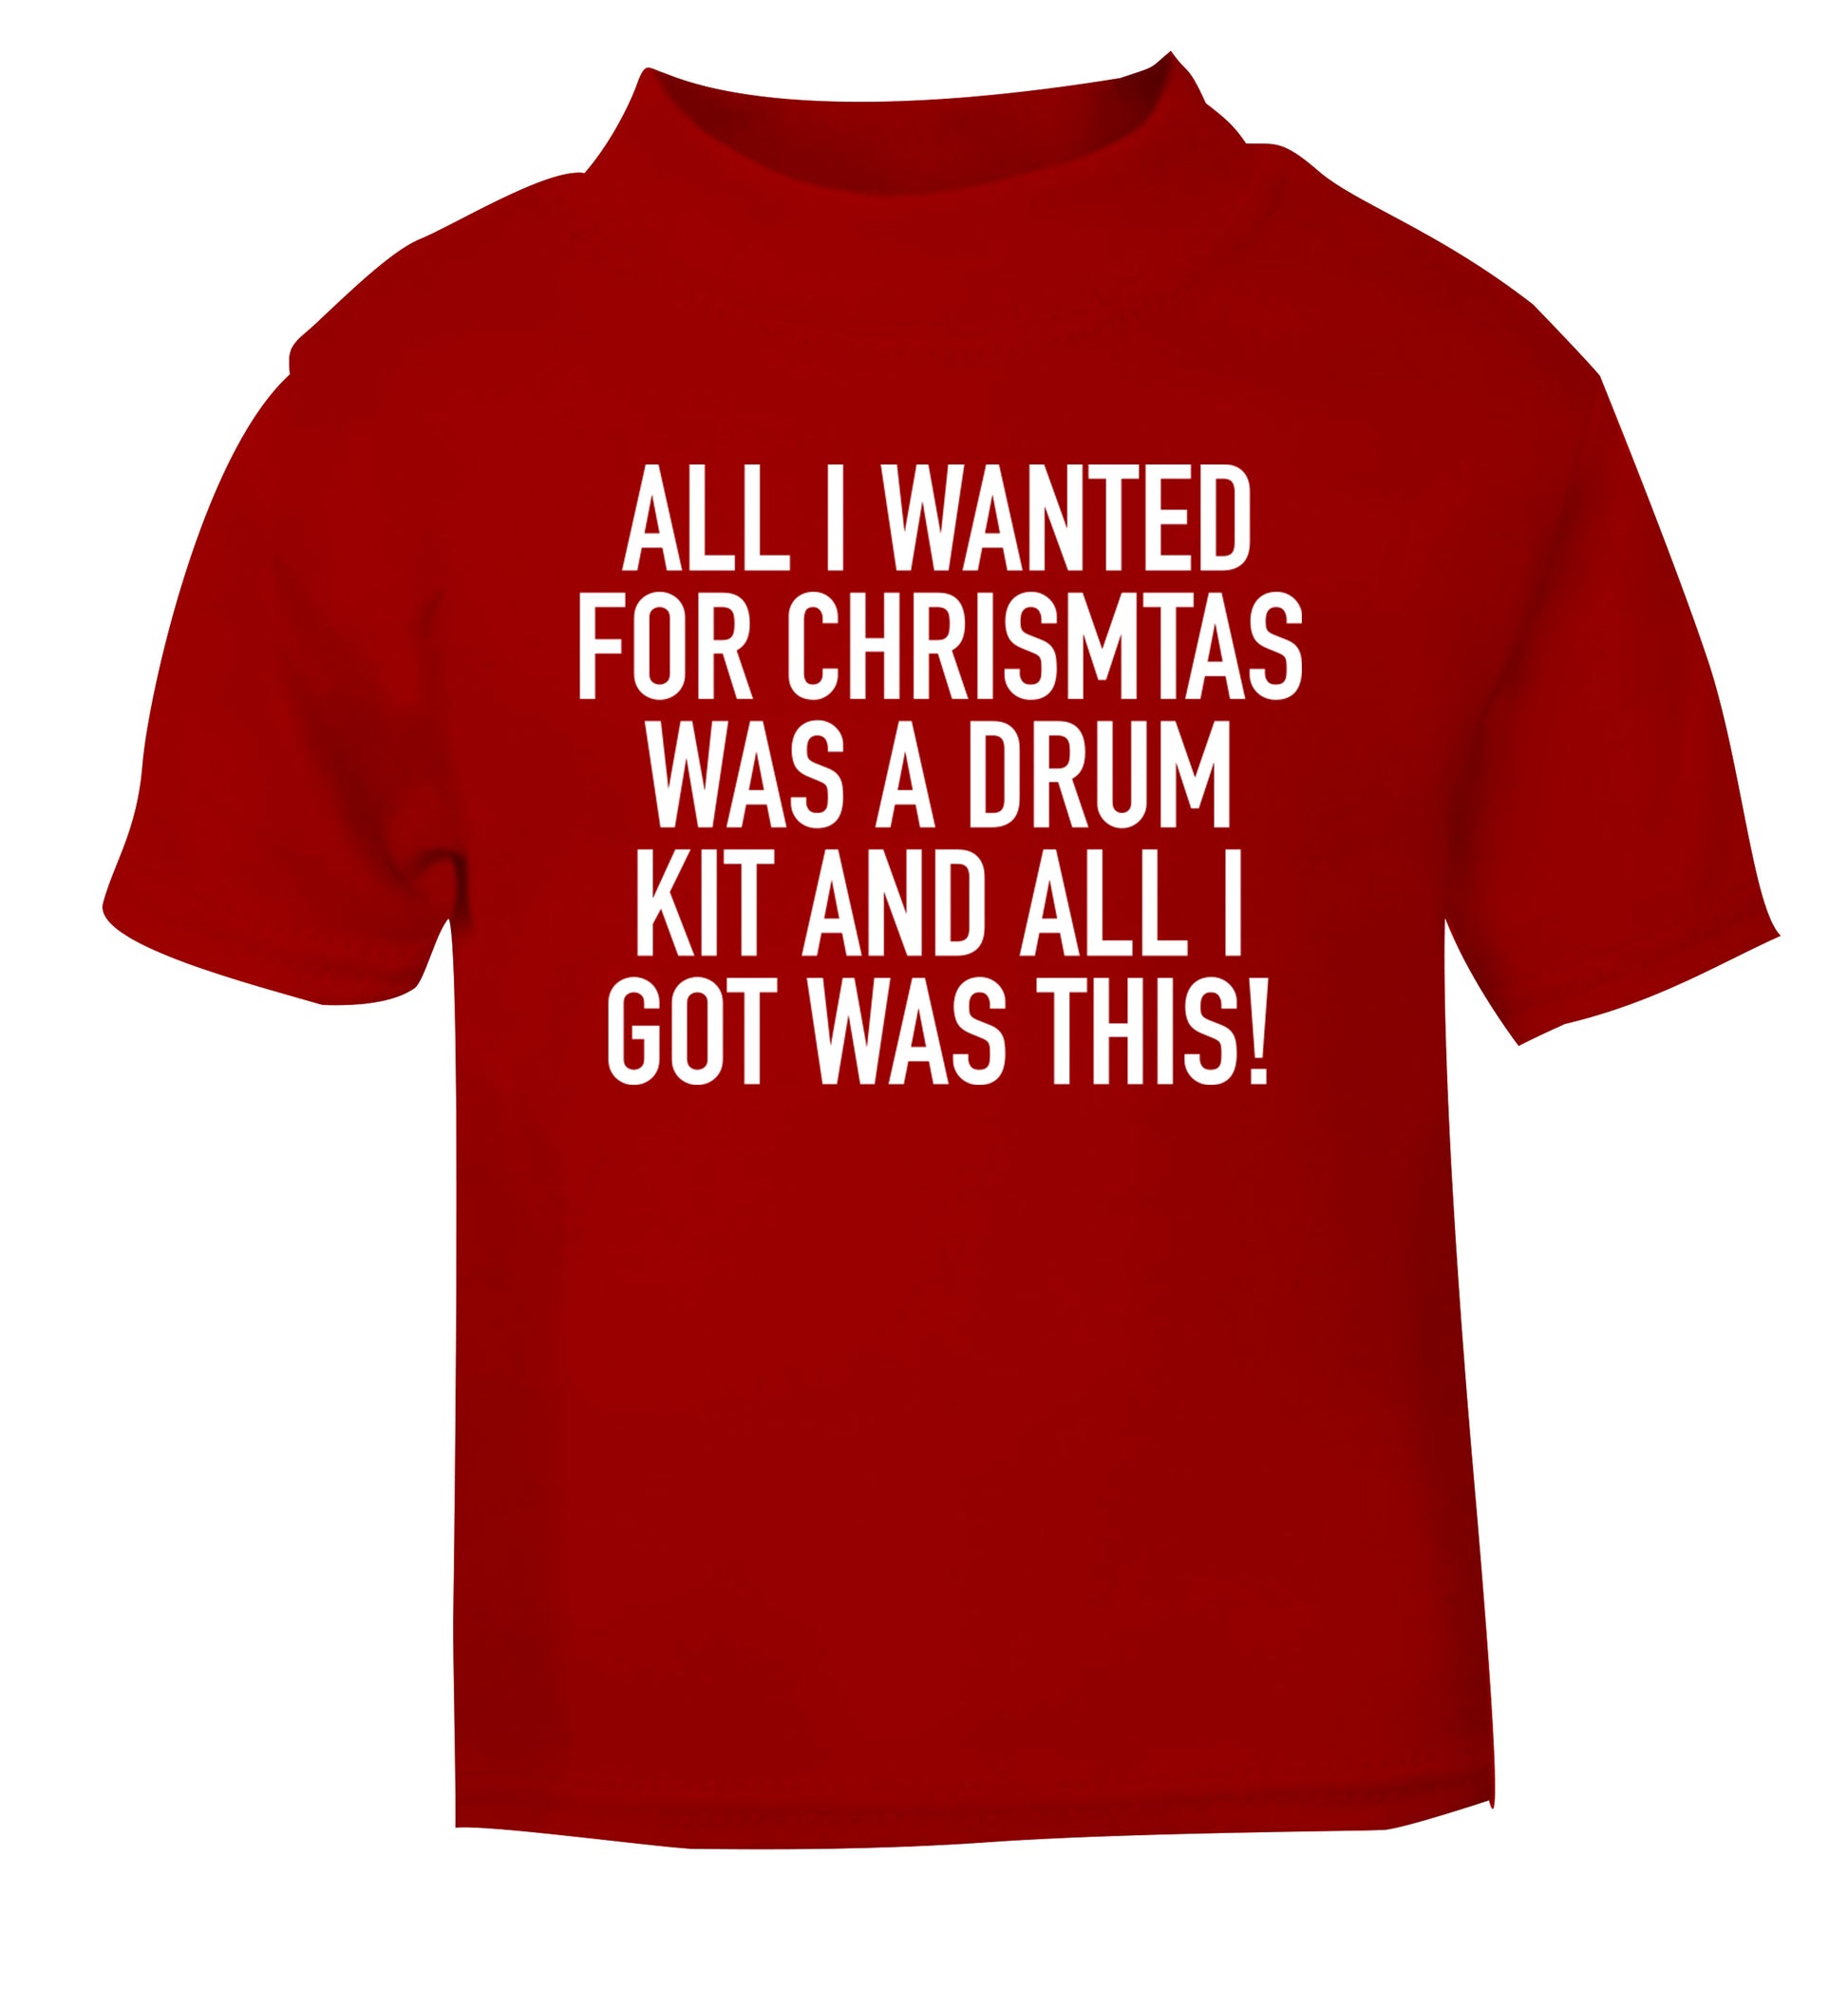 All I wanted for Christmas was a drum kit and all I got was this! red Baby Toddler Tshirt 2 Years